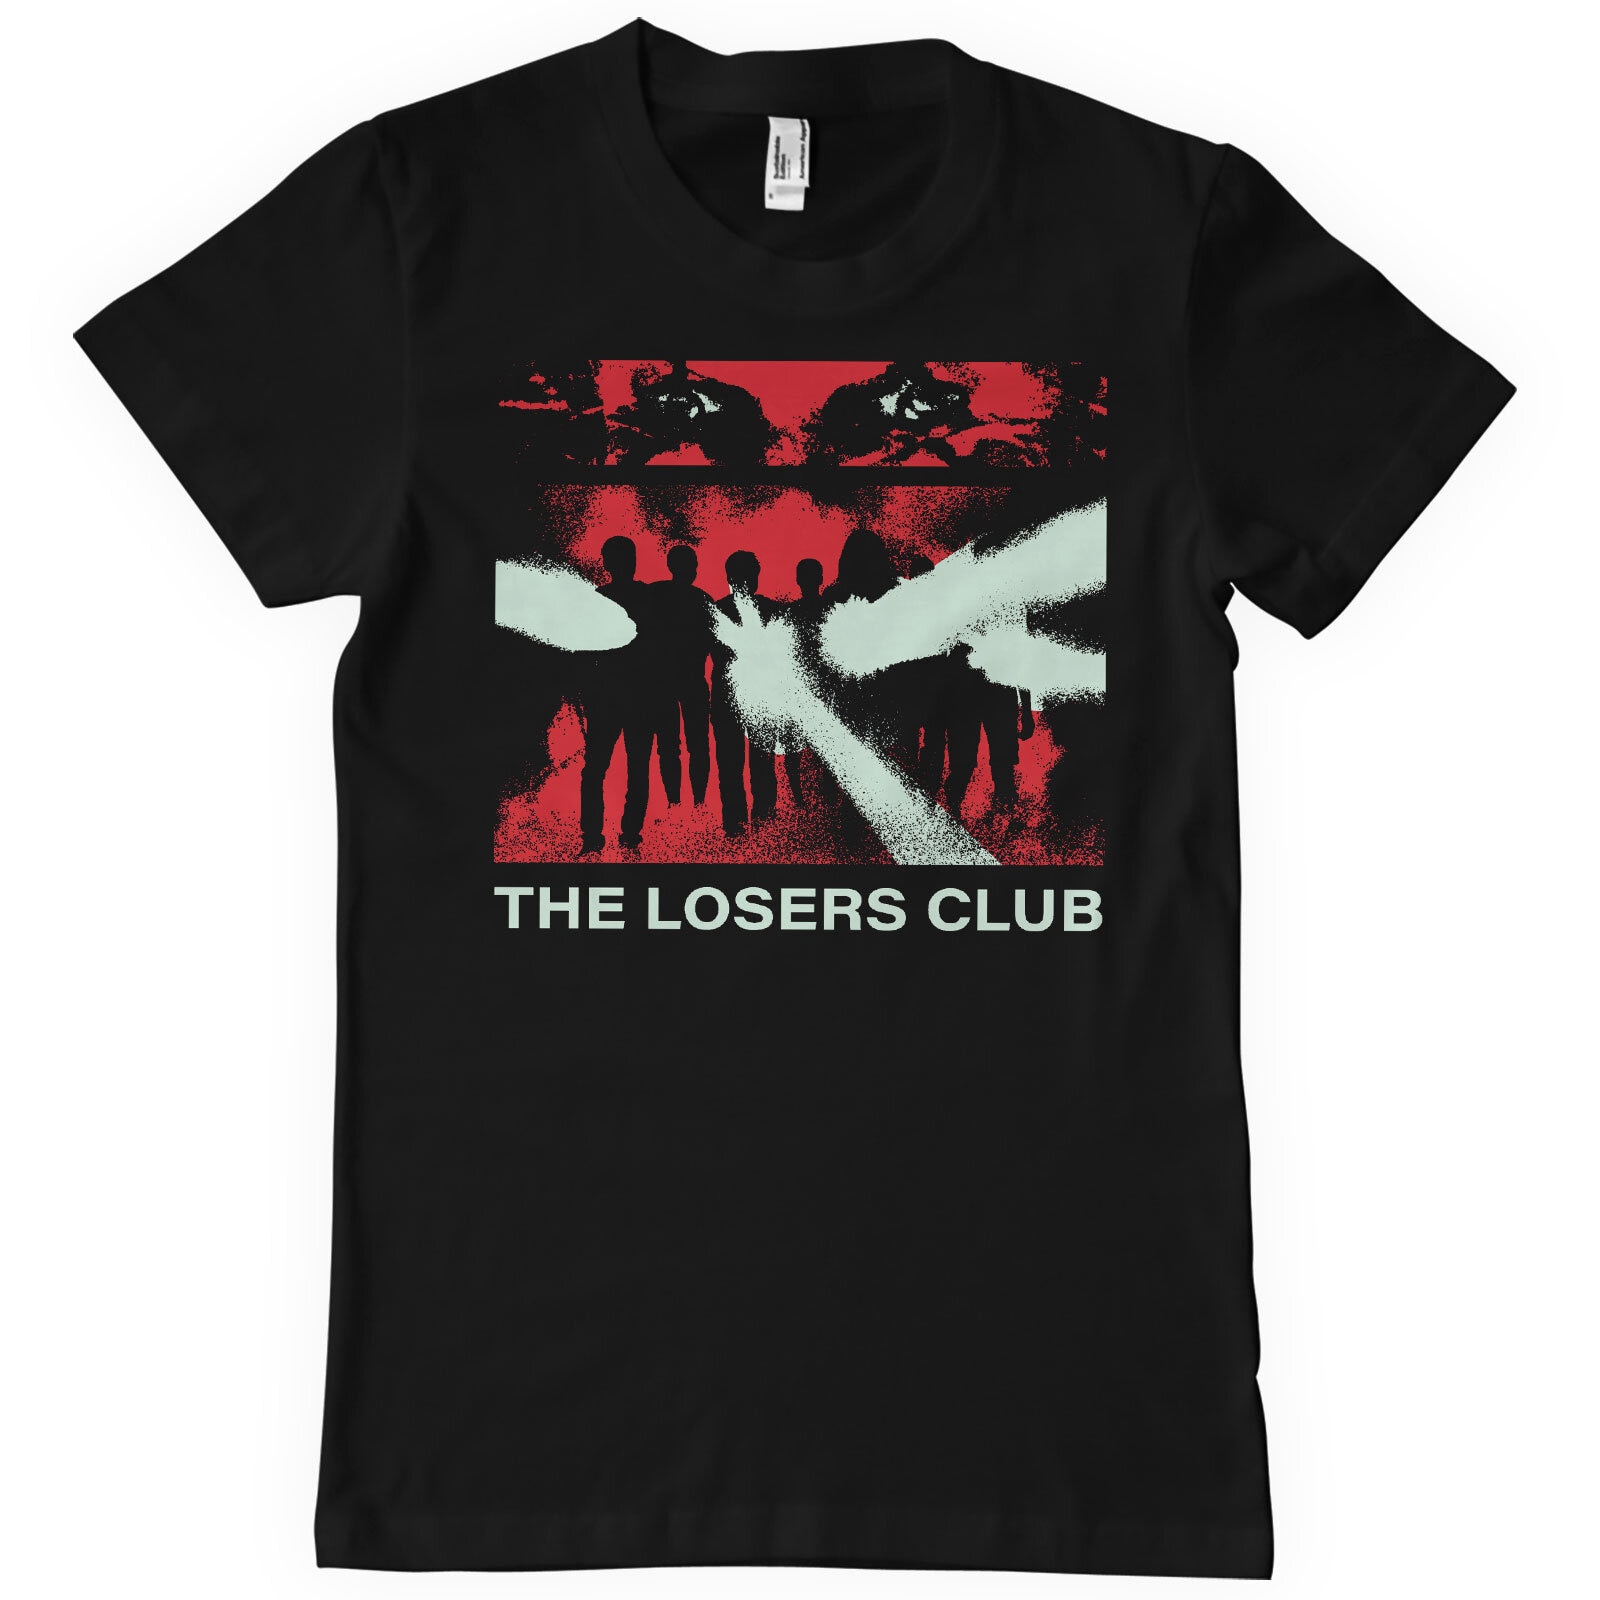 IT - The Losers Club T-Shirt